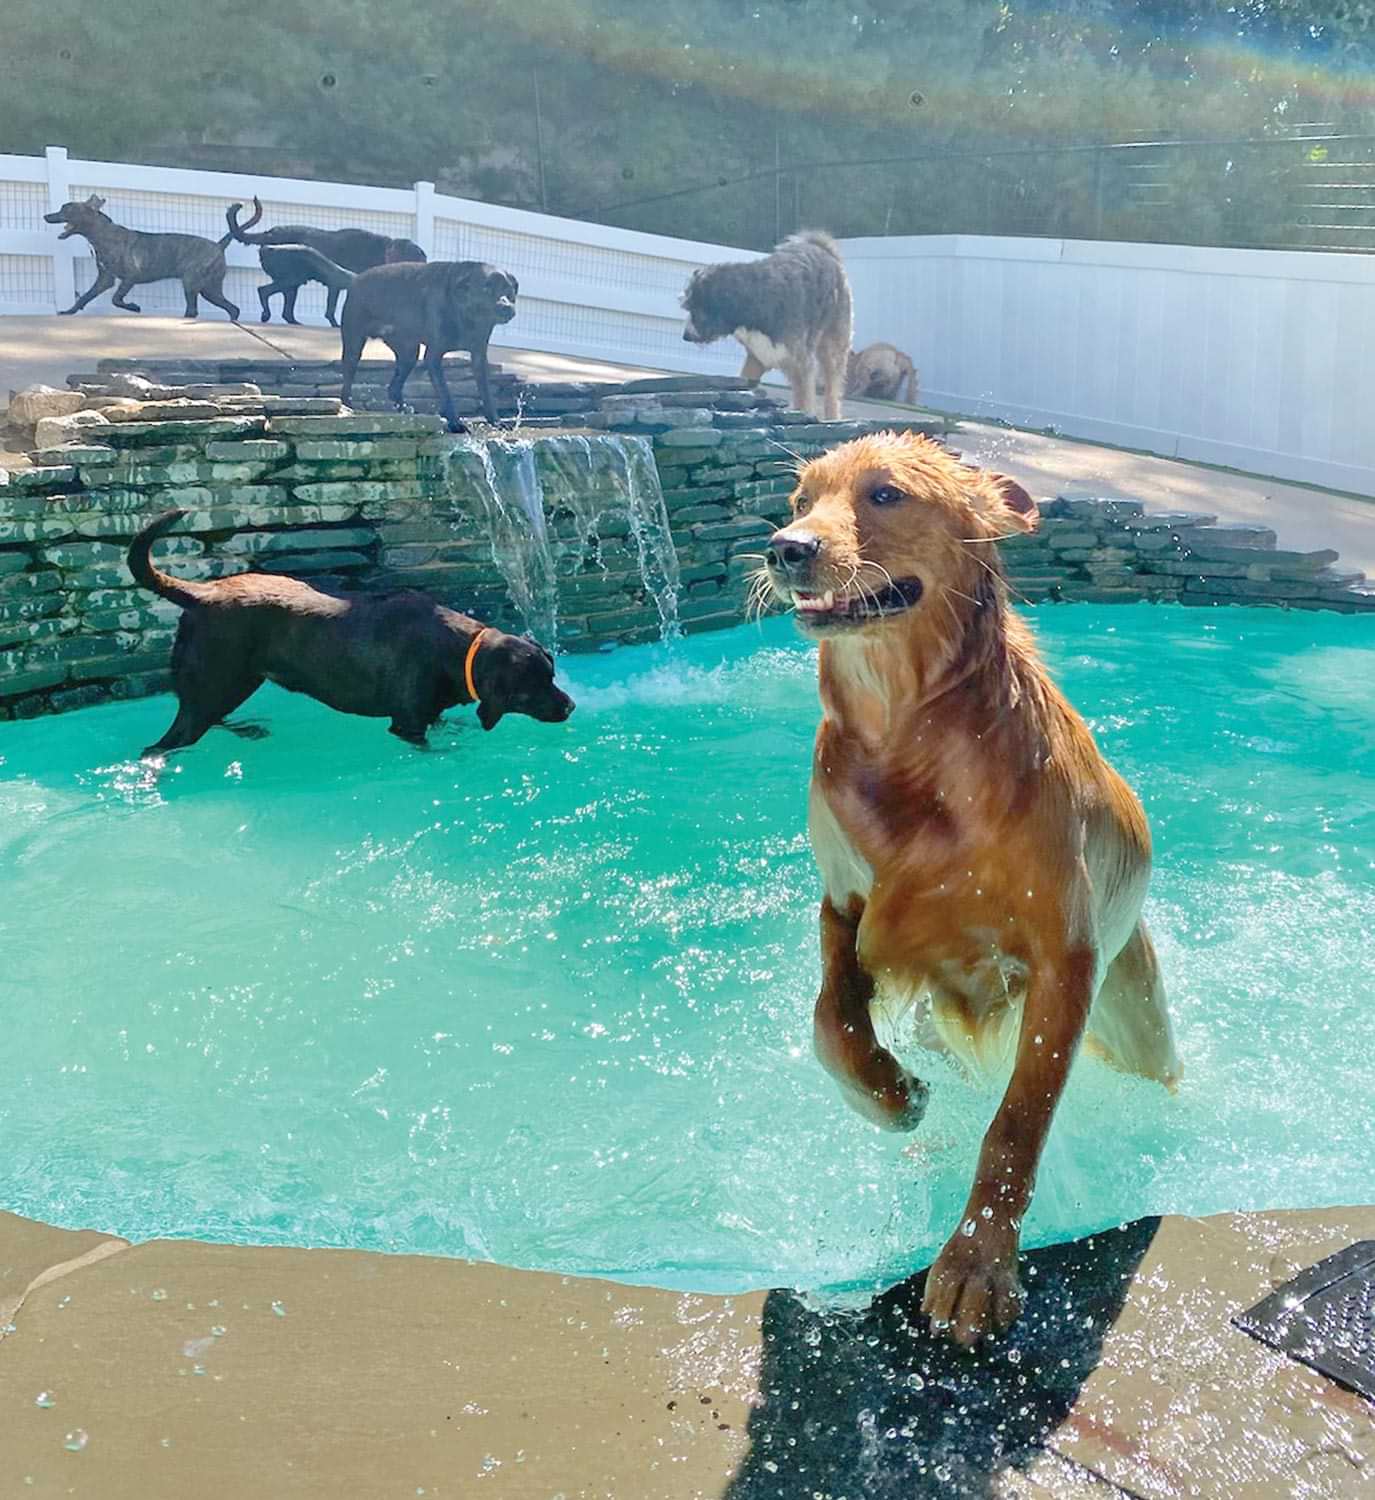 a dog emerges from a large pool while other dogs play in the background